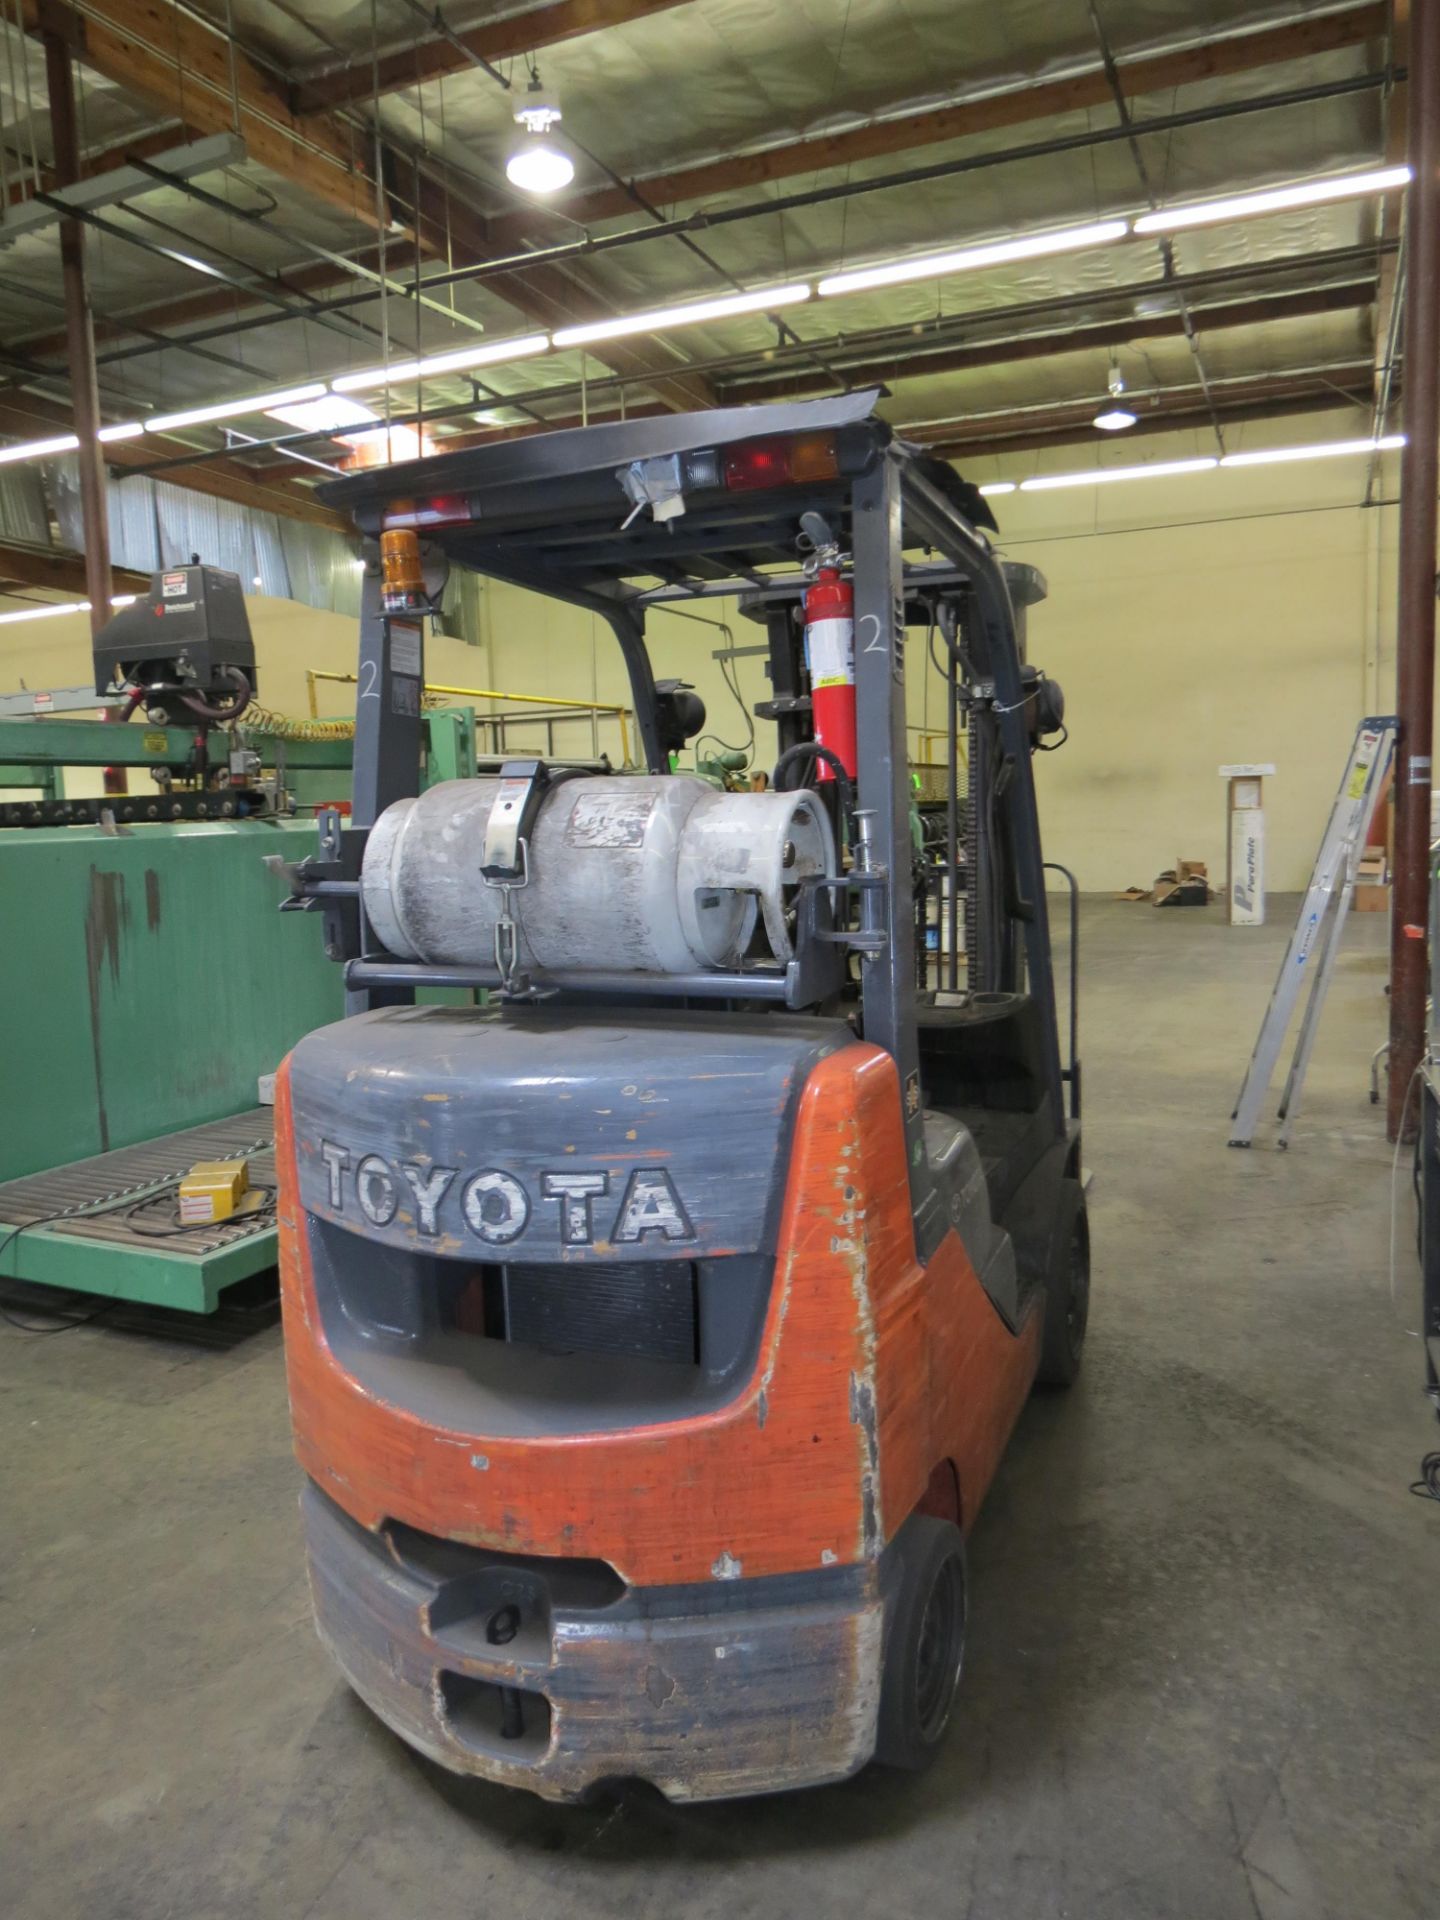 Toyota MDL: 8FGCU25 LPG Forklift 4,500 LBS Capacity 3-Stage, Side Shift SN: 13160(Subject to Deliver - Image 4 of 6